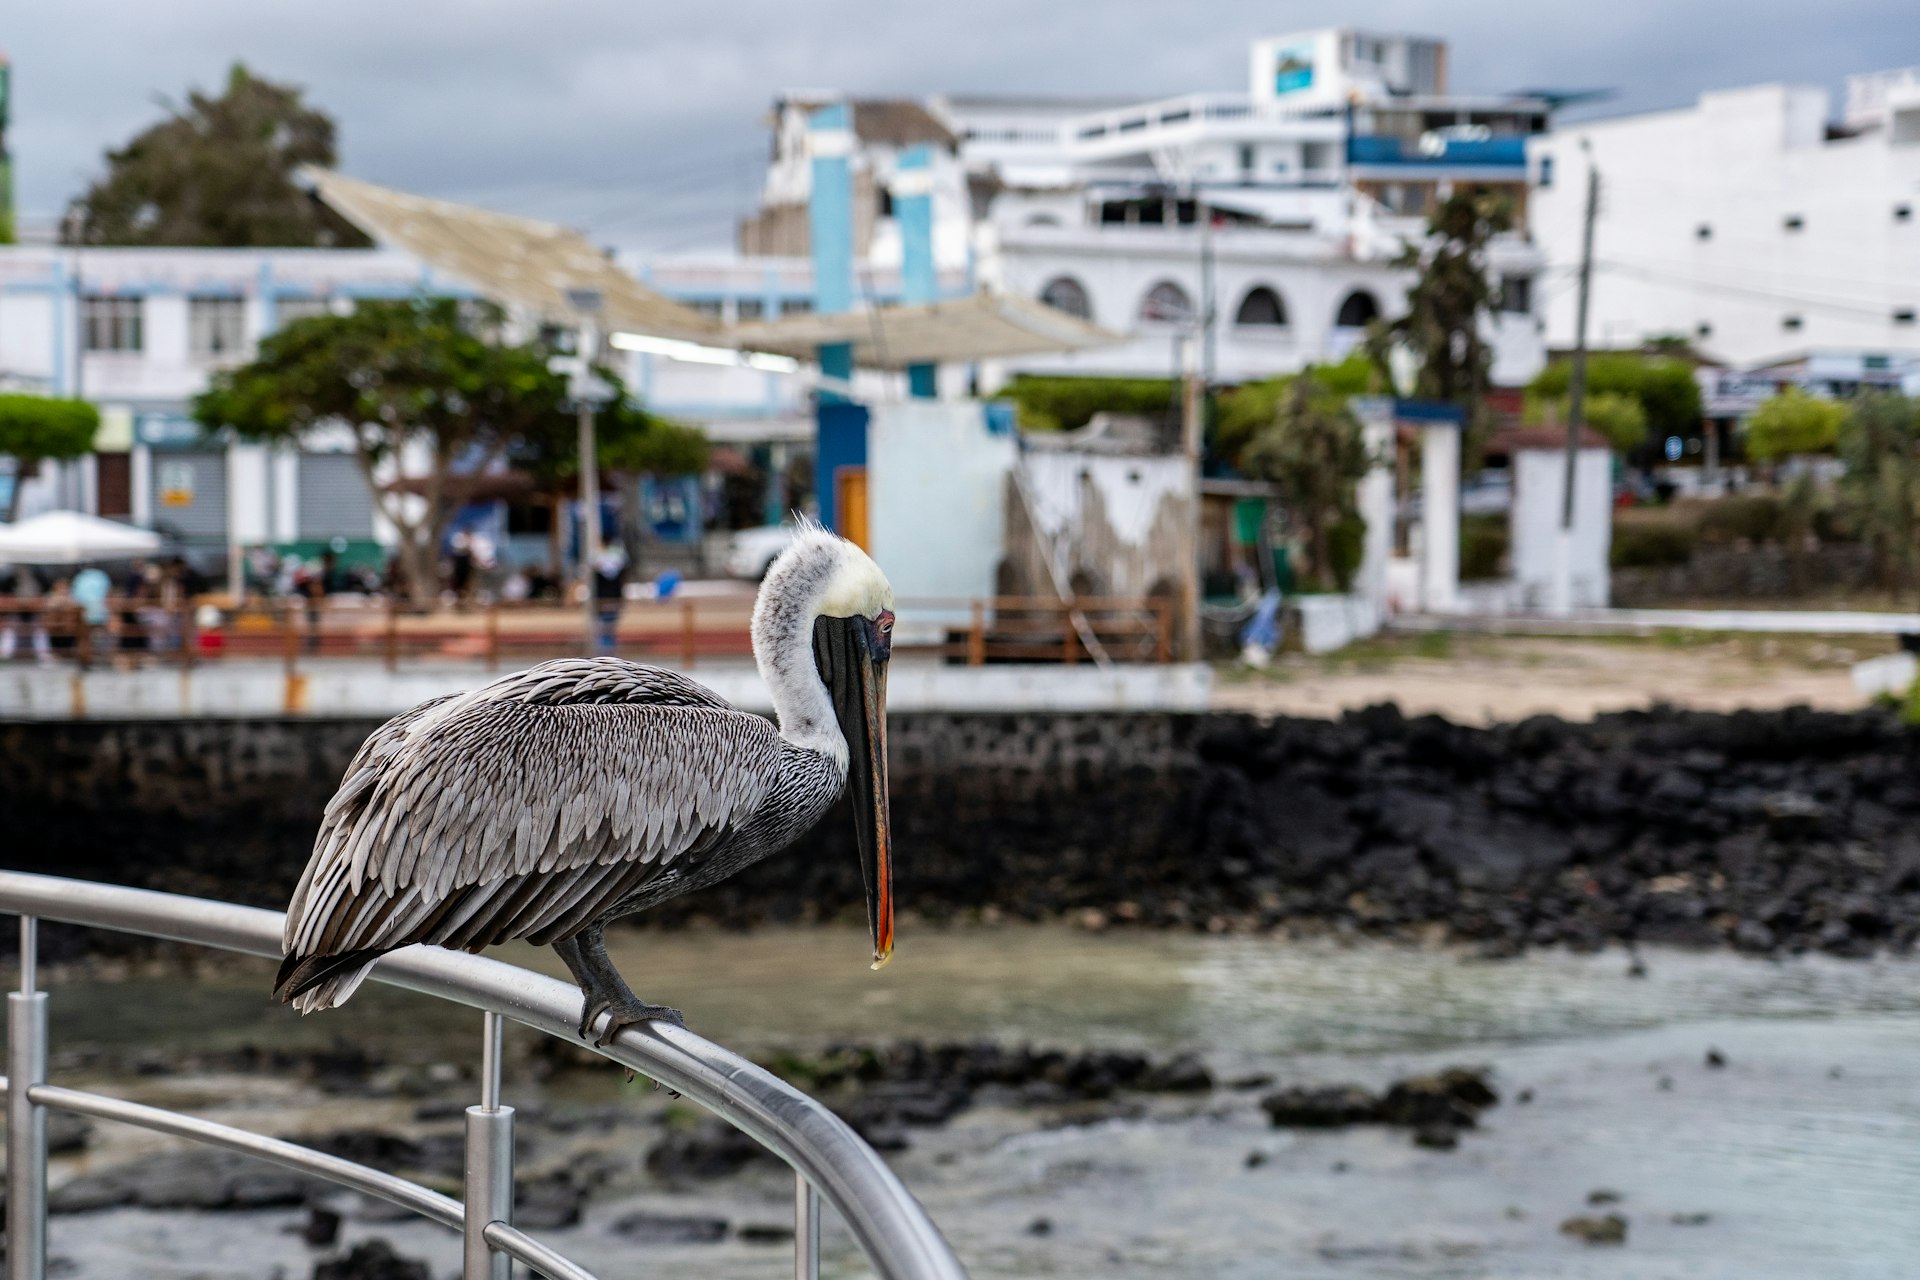 A pelican rests on the metal railing of a boat